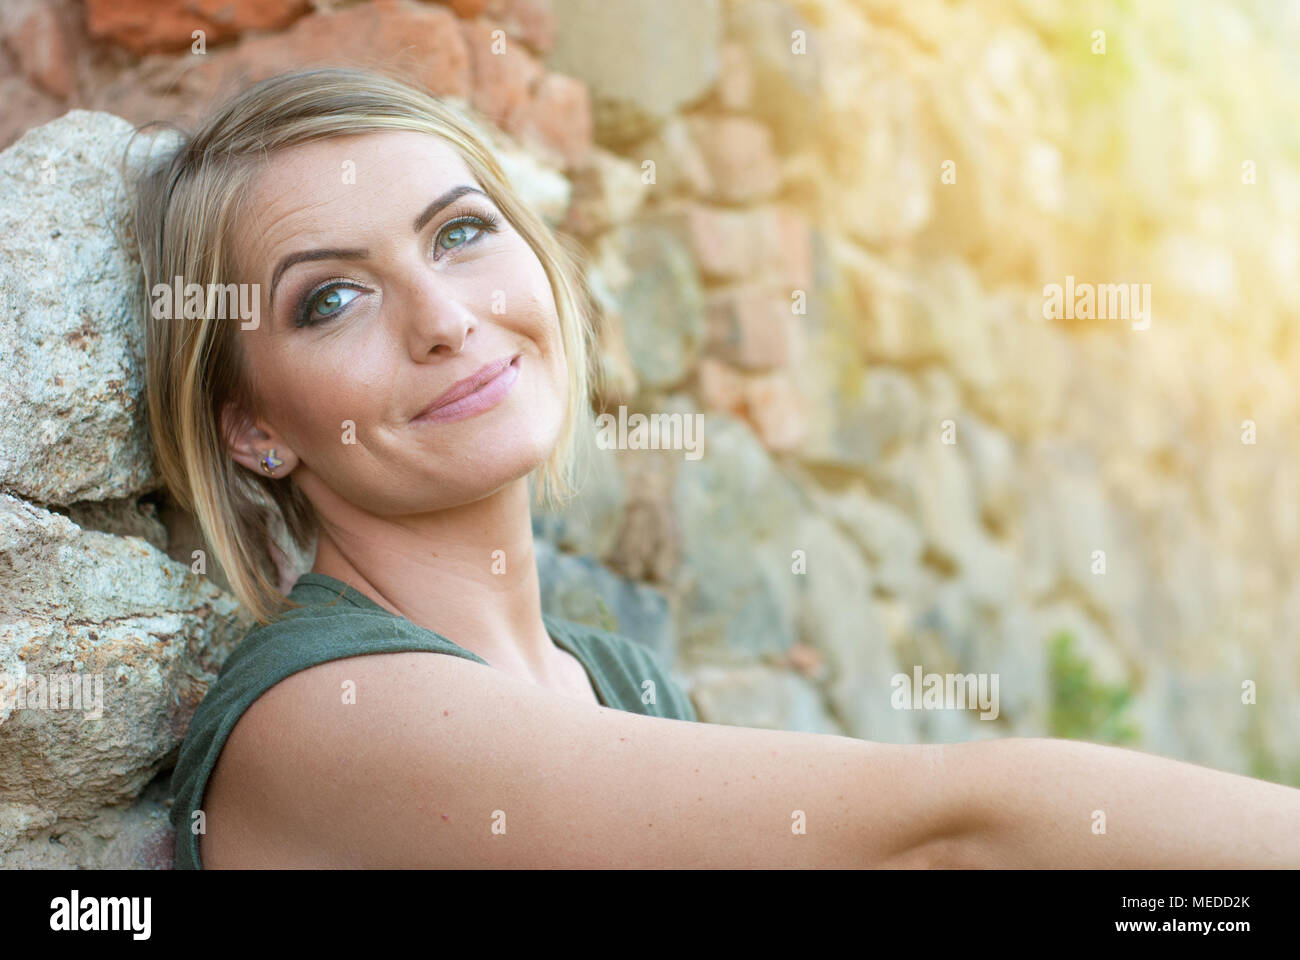 Beautiful happy blonde woman smiling and enjoying her time outside in park Stock Photo